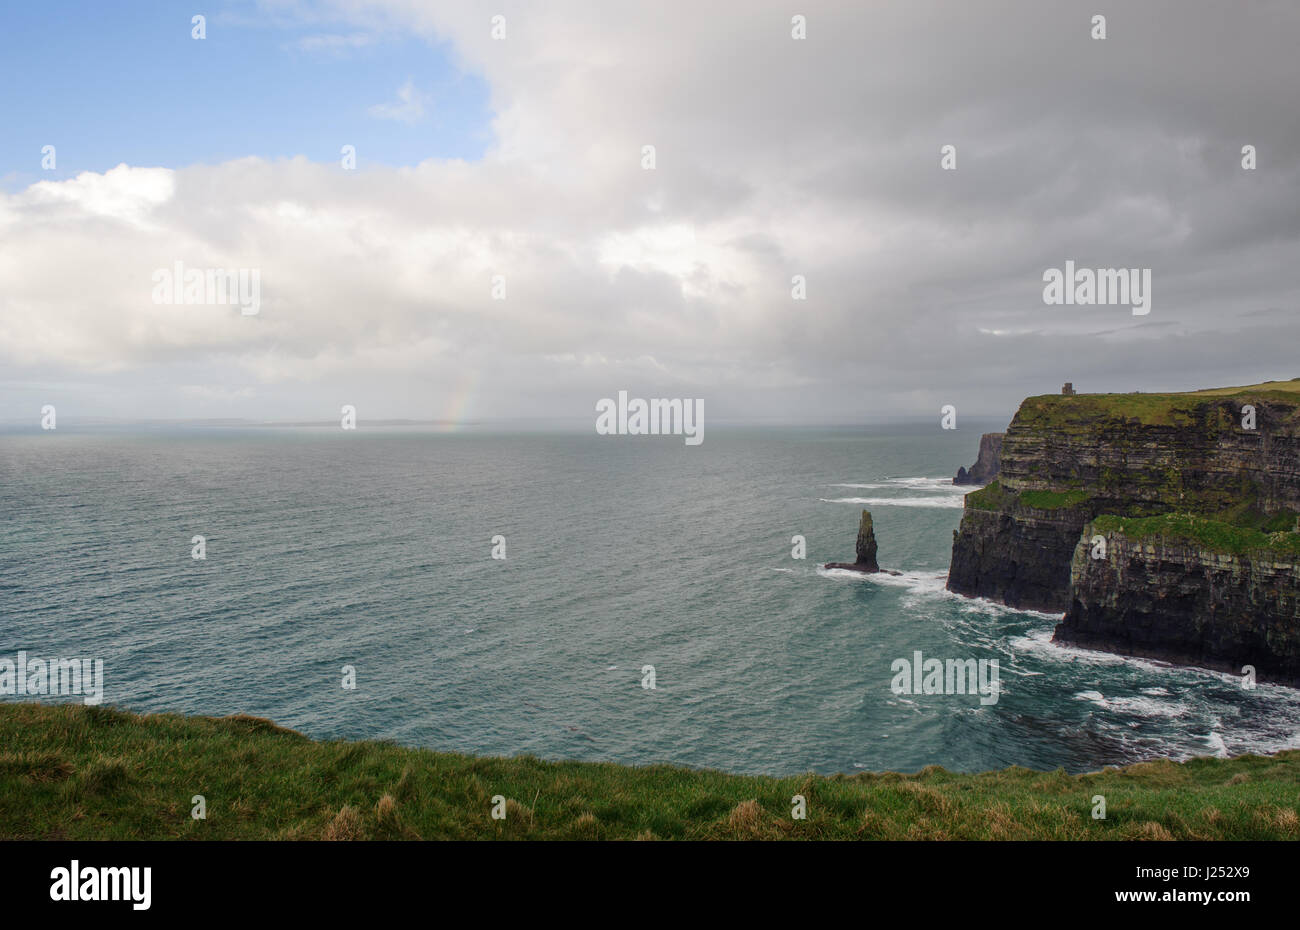 Cliffs of Moher, County Clare, Ireland Stock Photo